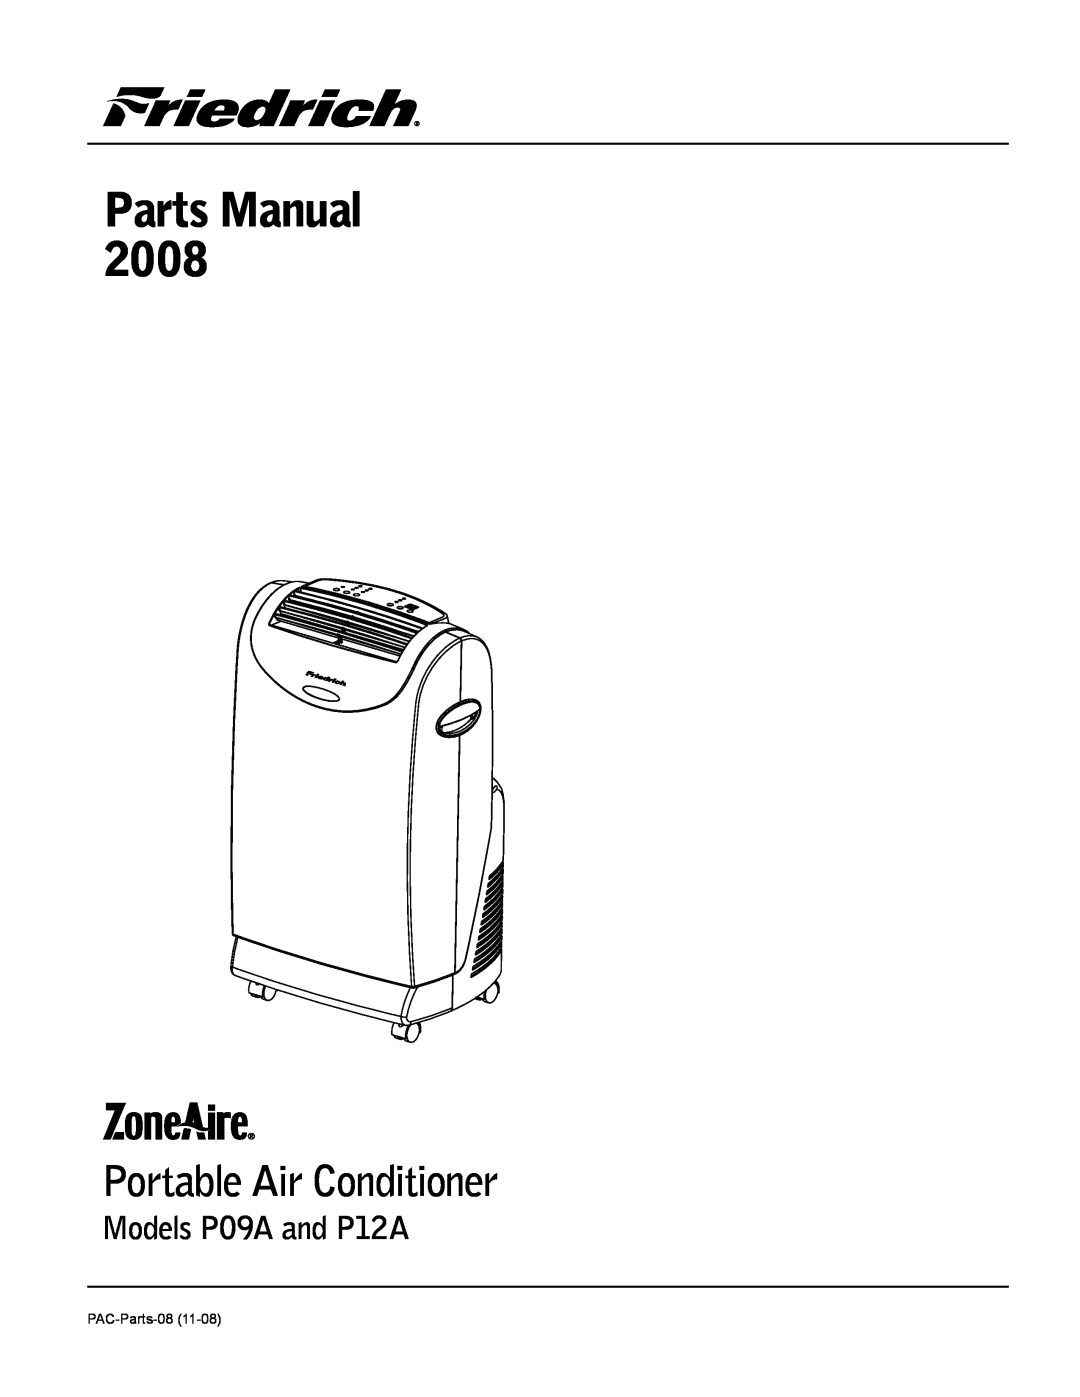 Friedrich manual Models P09A and P12A, Parts Manual, Portable Air Conditioner 